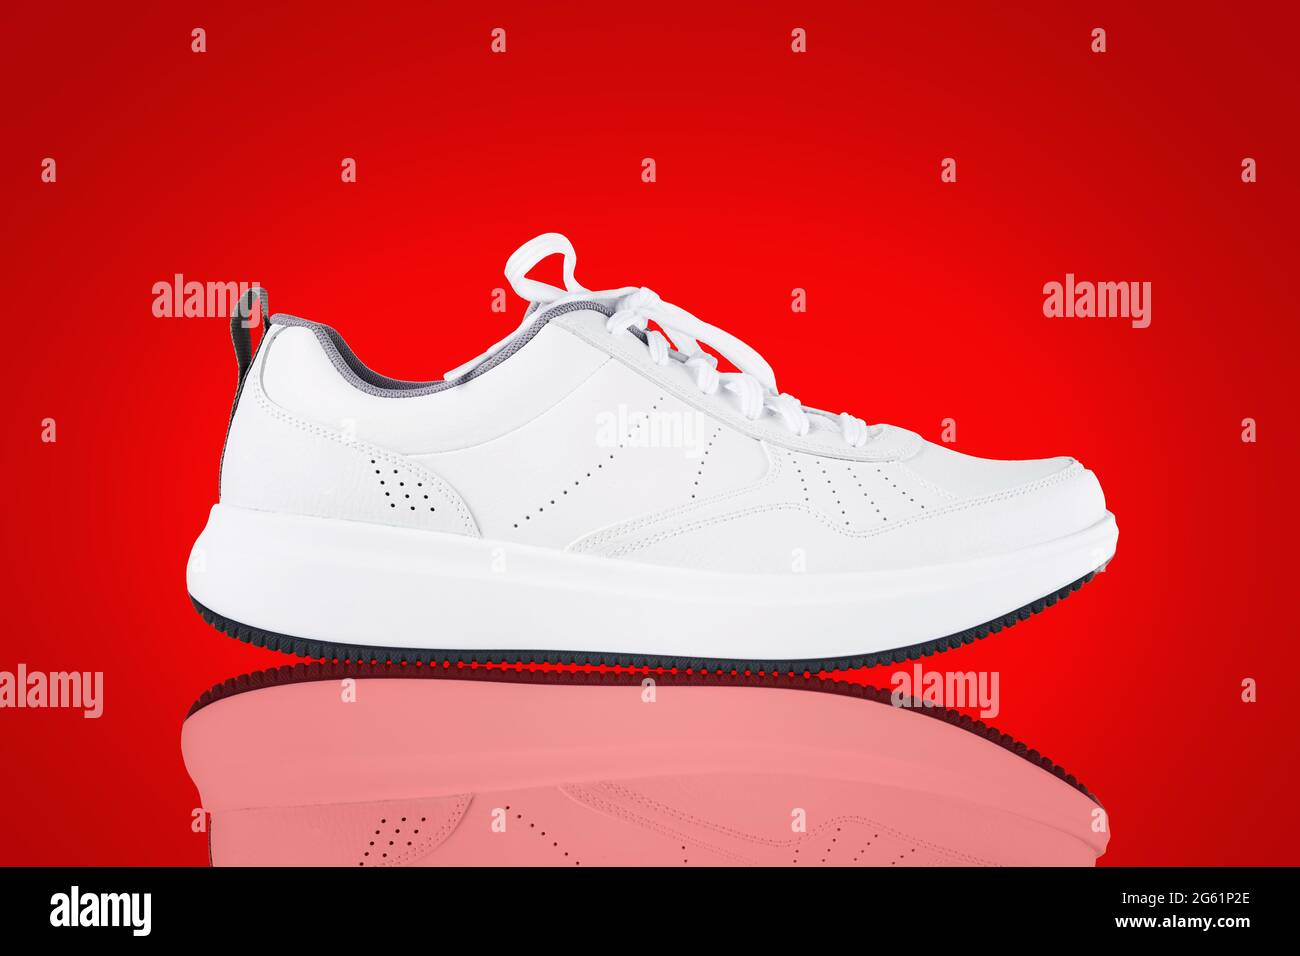 White new sneaker isolated on red background with reflection. Sport shoe close up. Street fashion style Stock Photo